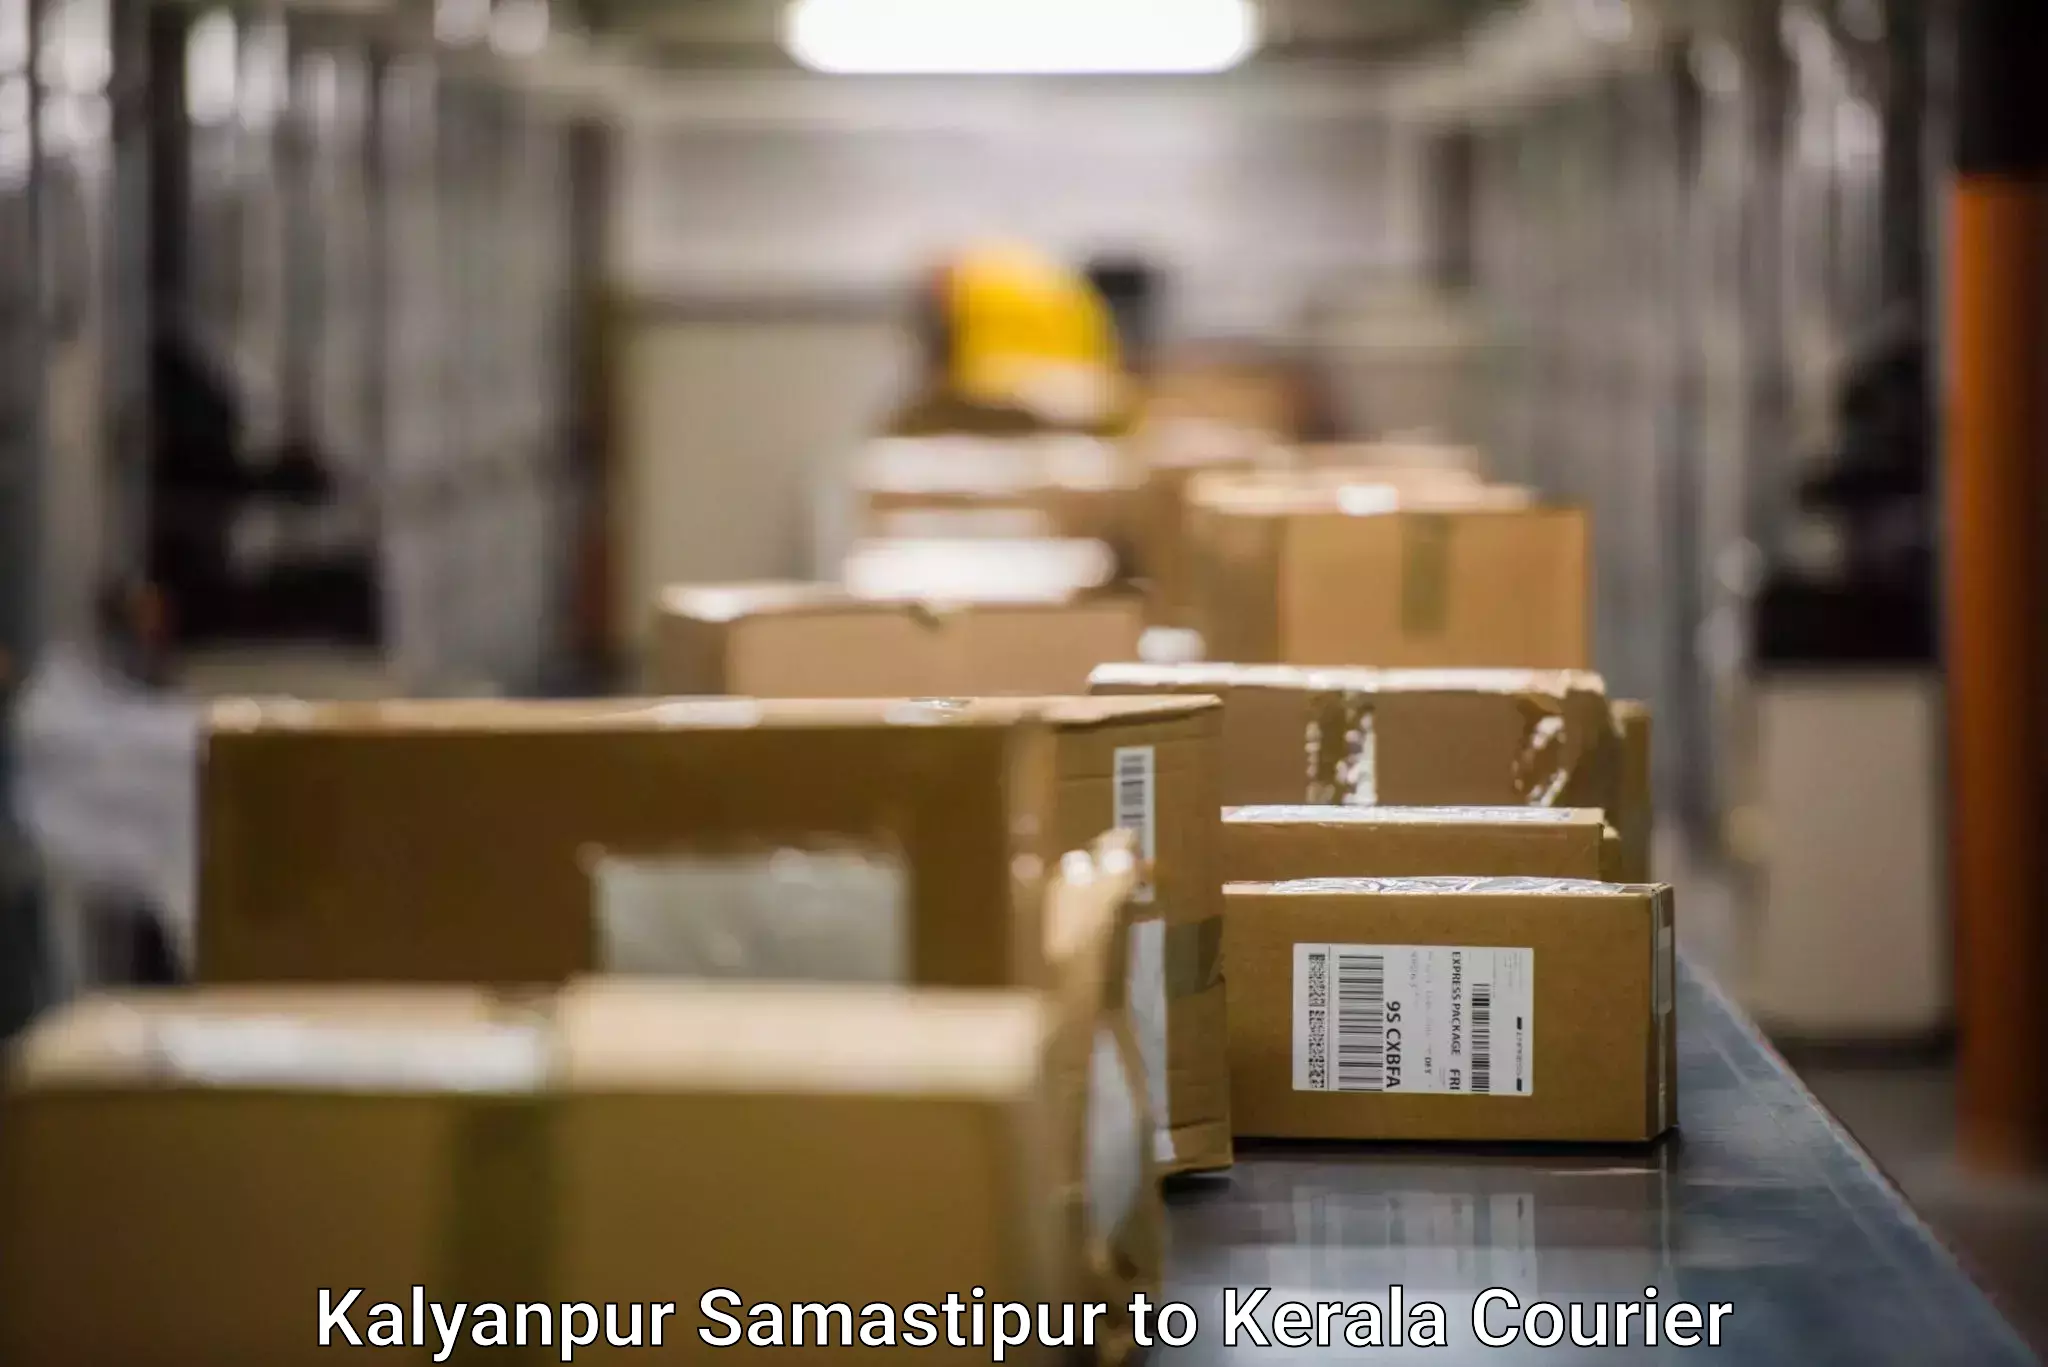 Round-the-clock parcel delivery Kalyanpur Samastipur to Alathur Malabar